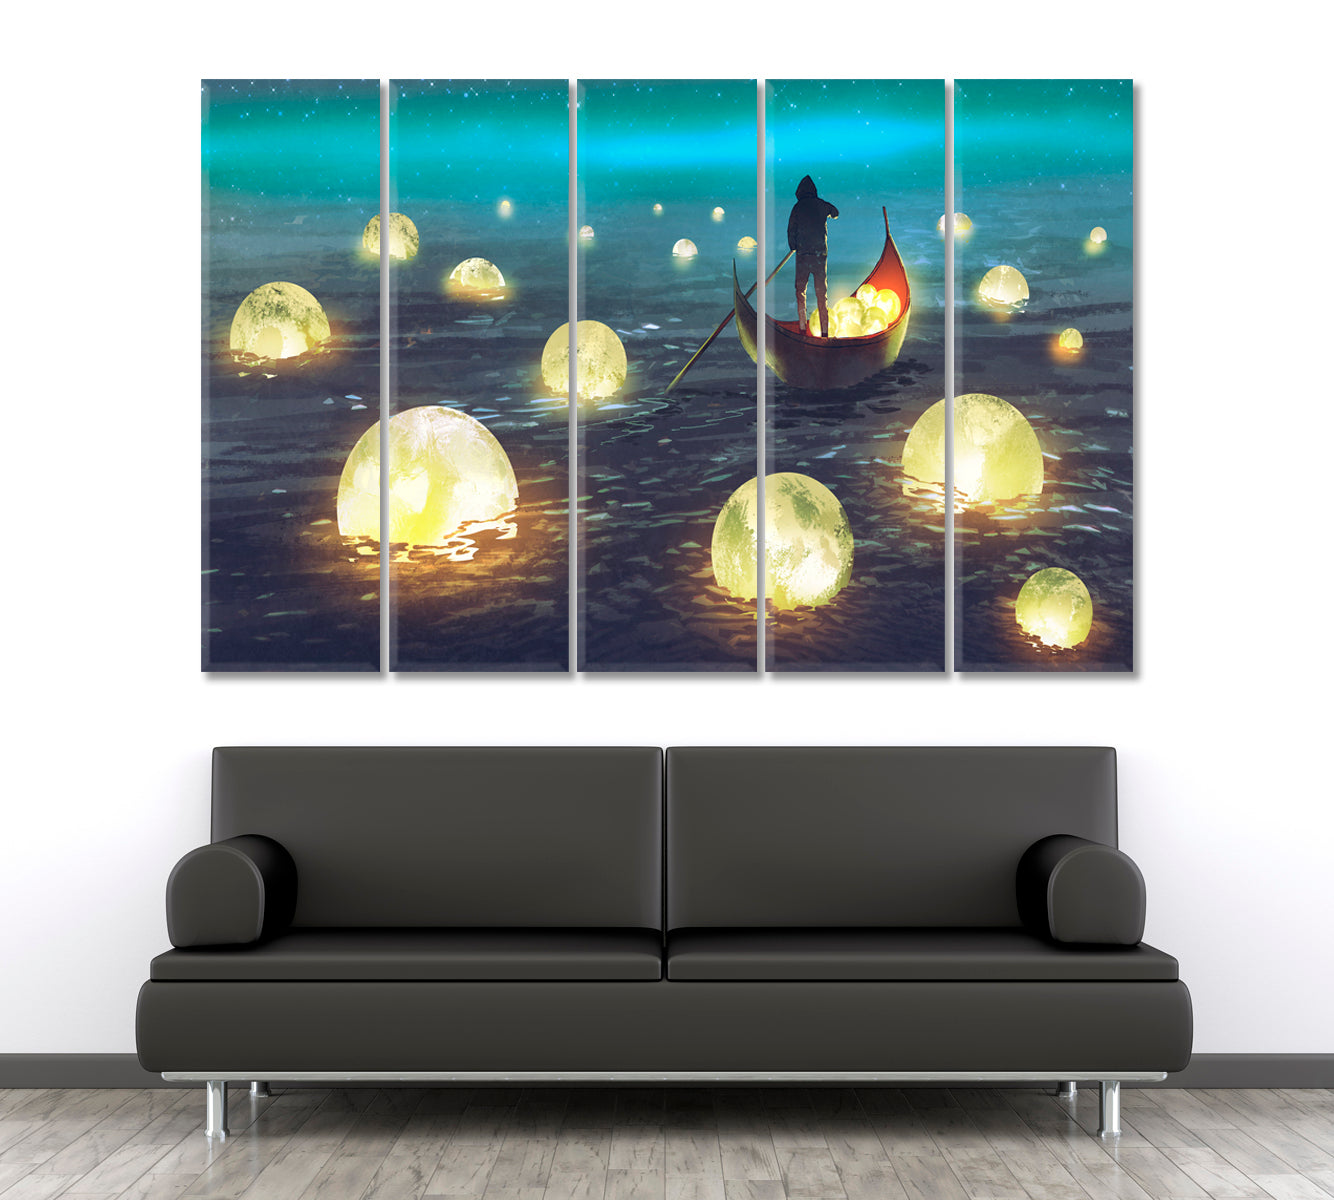 SURREAL Night Scenery Man Rowing Boat Glowing Moons Floating Sea Surreal Fantasy Large Art Print Décor Artesty 5 panels 36" x 24" 